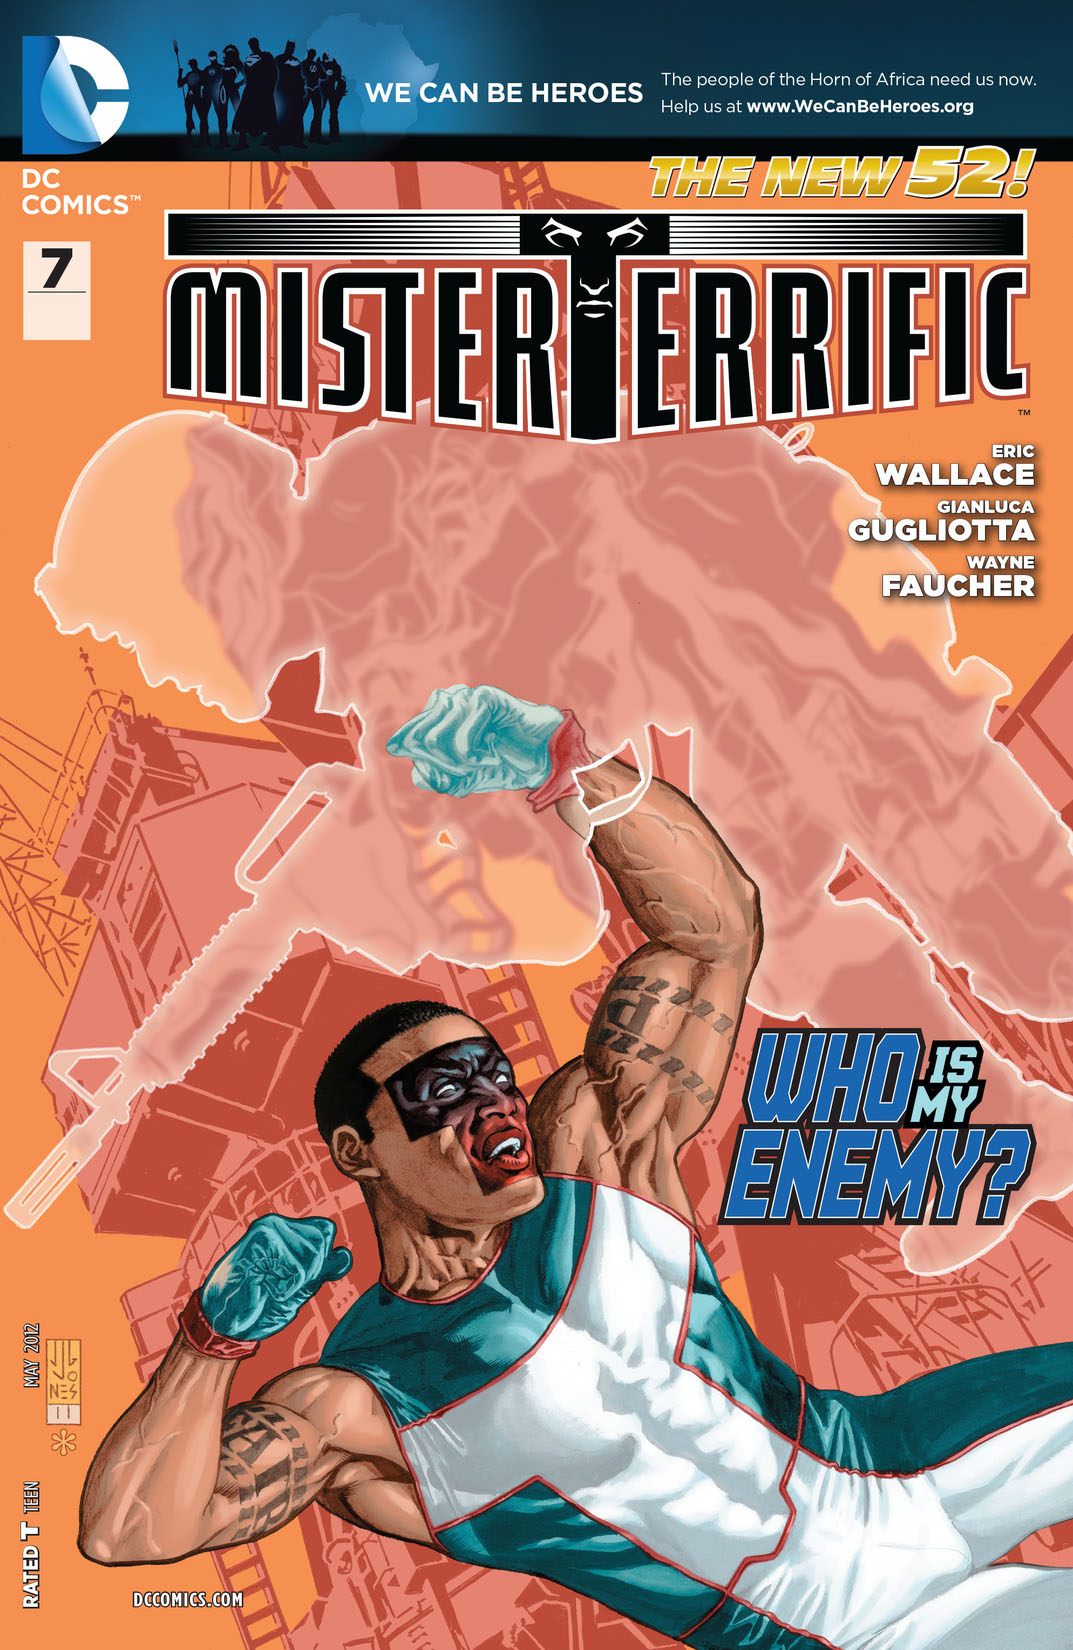 Mister Terrific #7 preview images